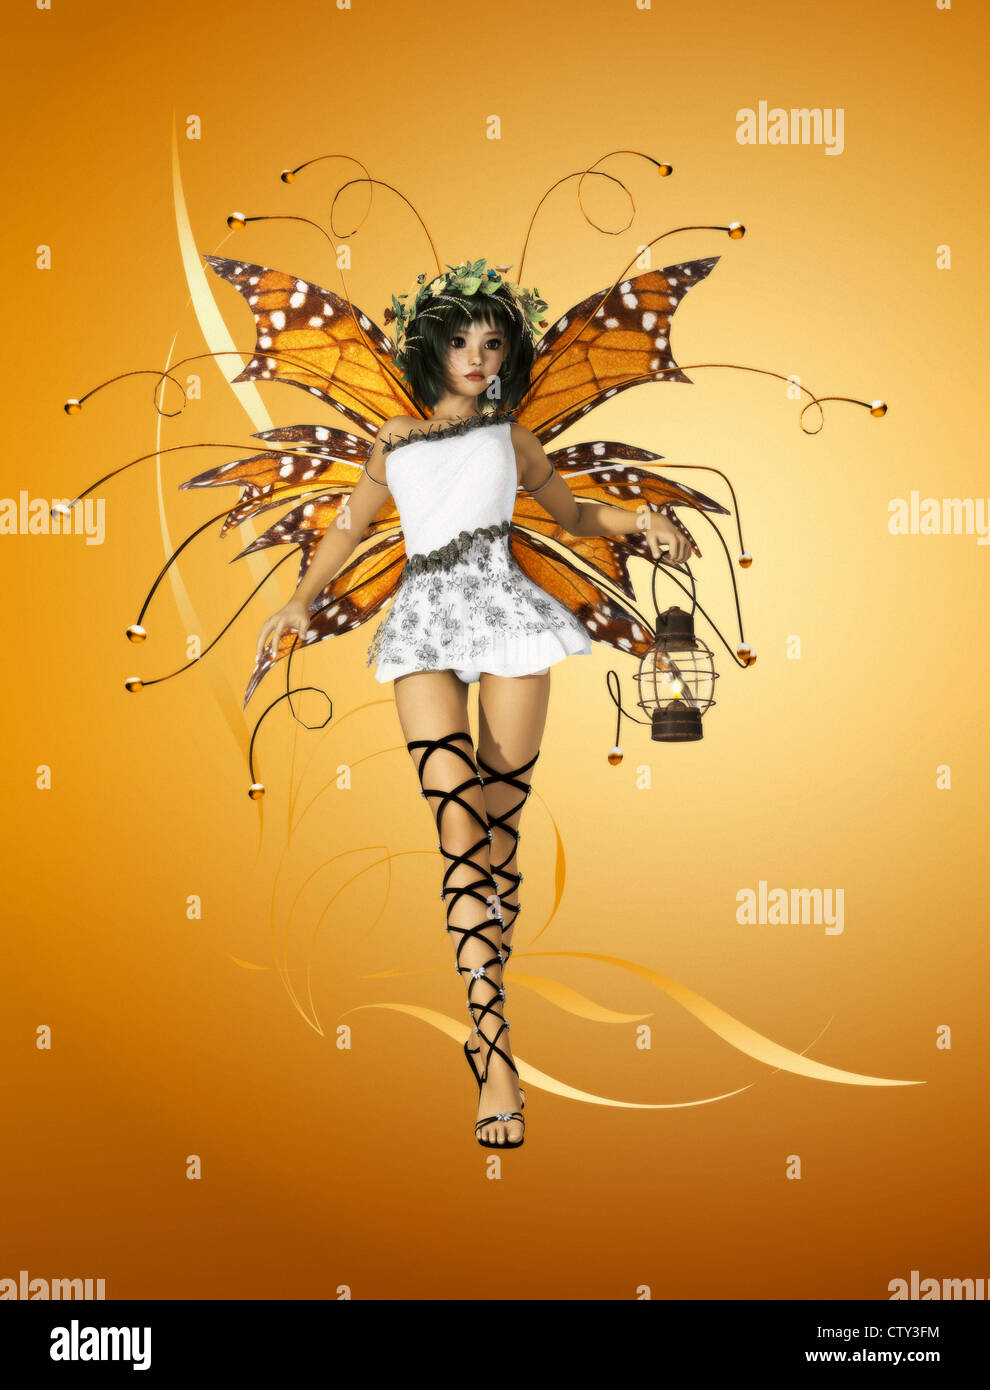 A graceful fairy with wings, wreath and lantern Stock Photo